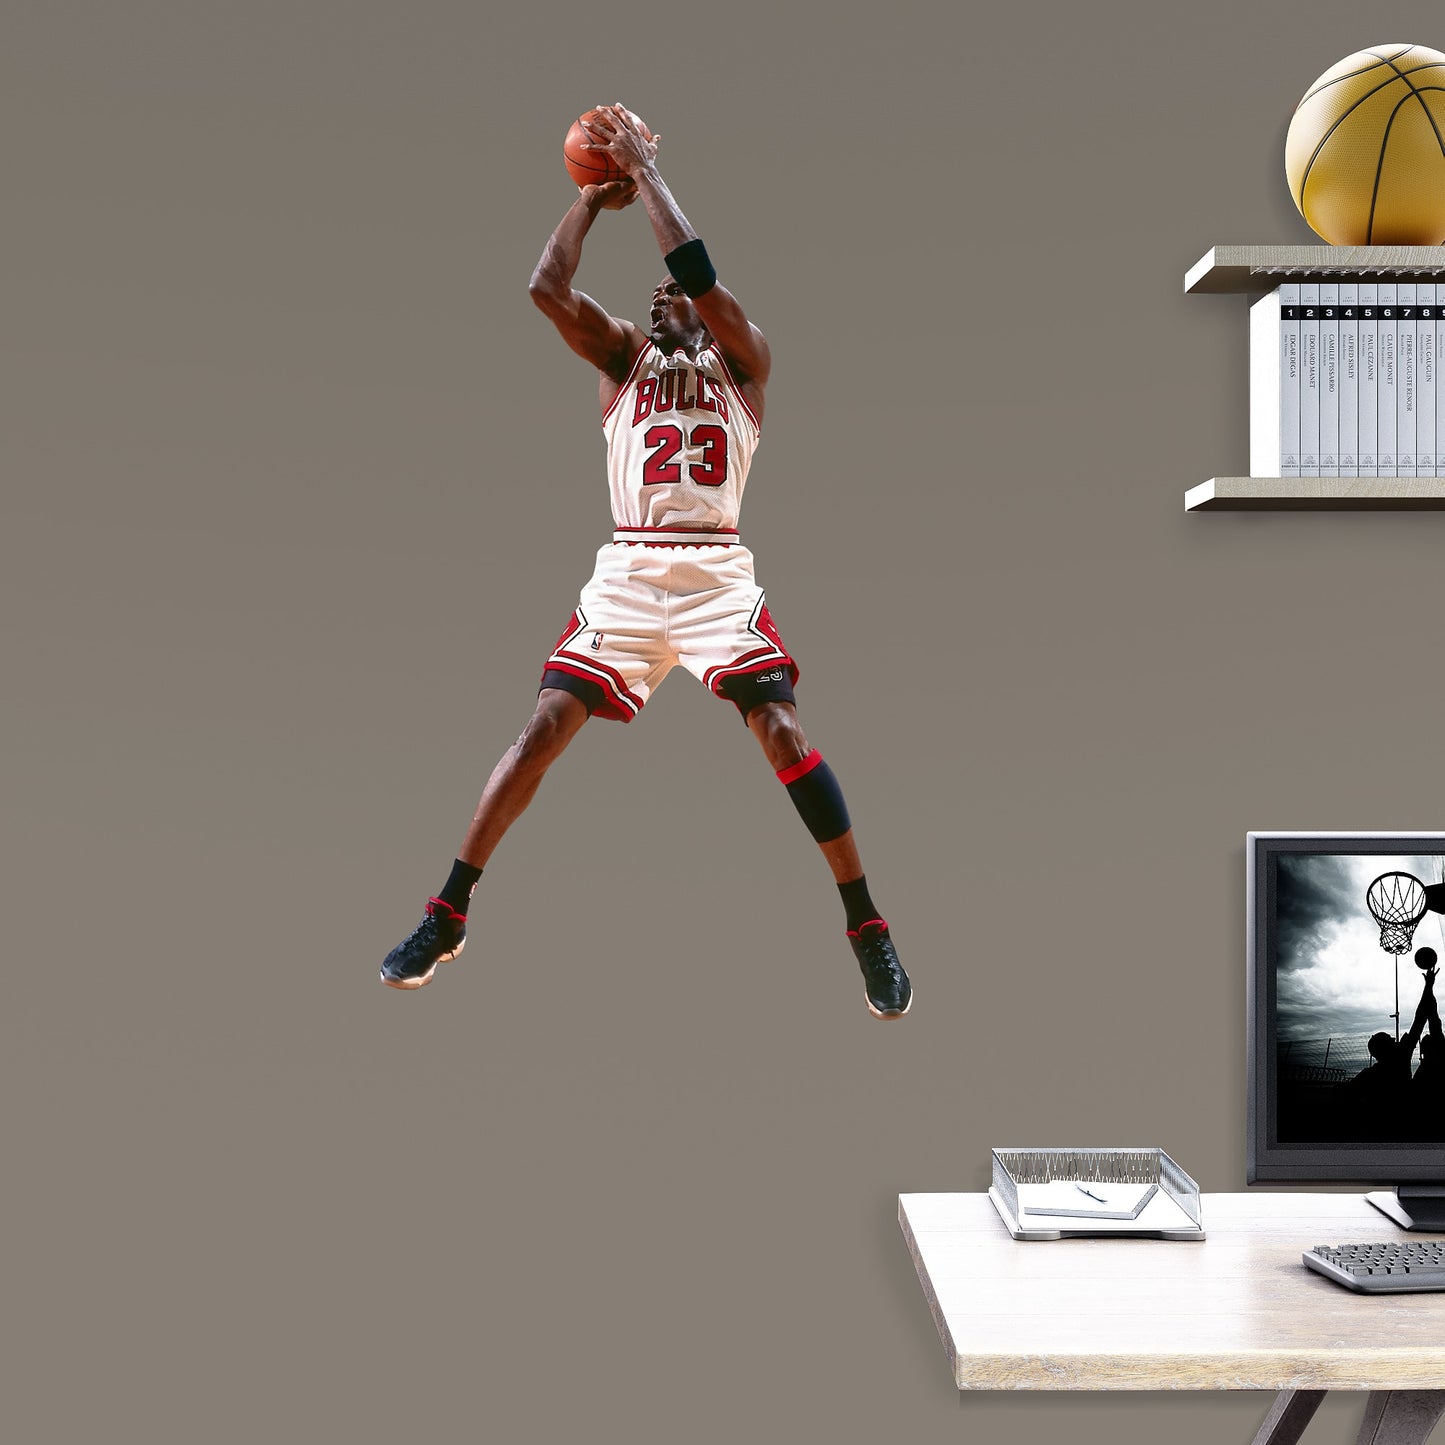 Michael Jordan: Jumper - Officially Licensed NBA Removable Wall Decal